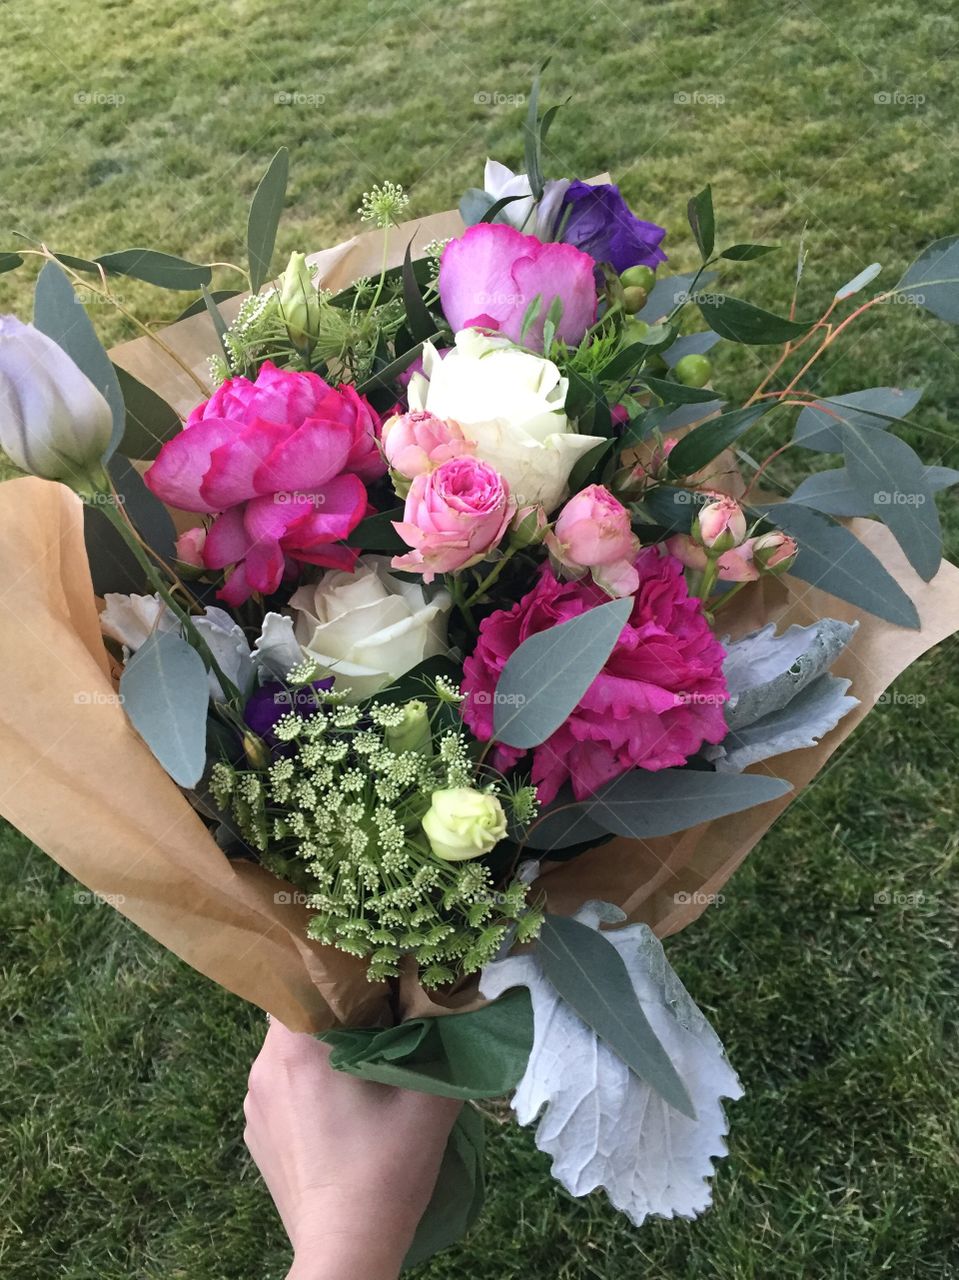 Beautiful, lush pink, purple, white and green bouquet of flowers with carnations, roses, and peonies being held in a woman’s hand